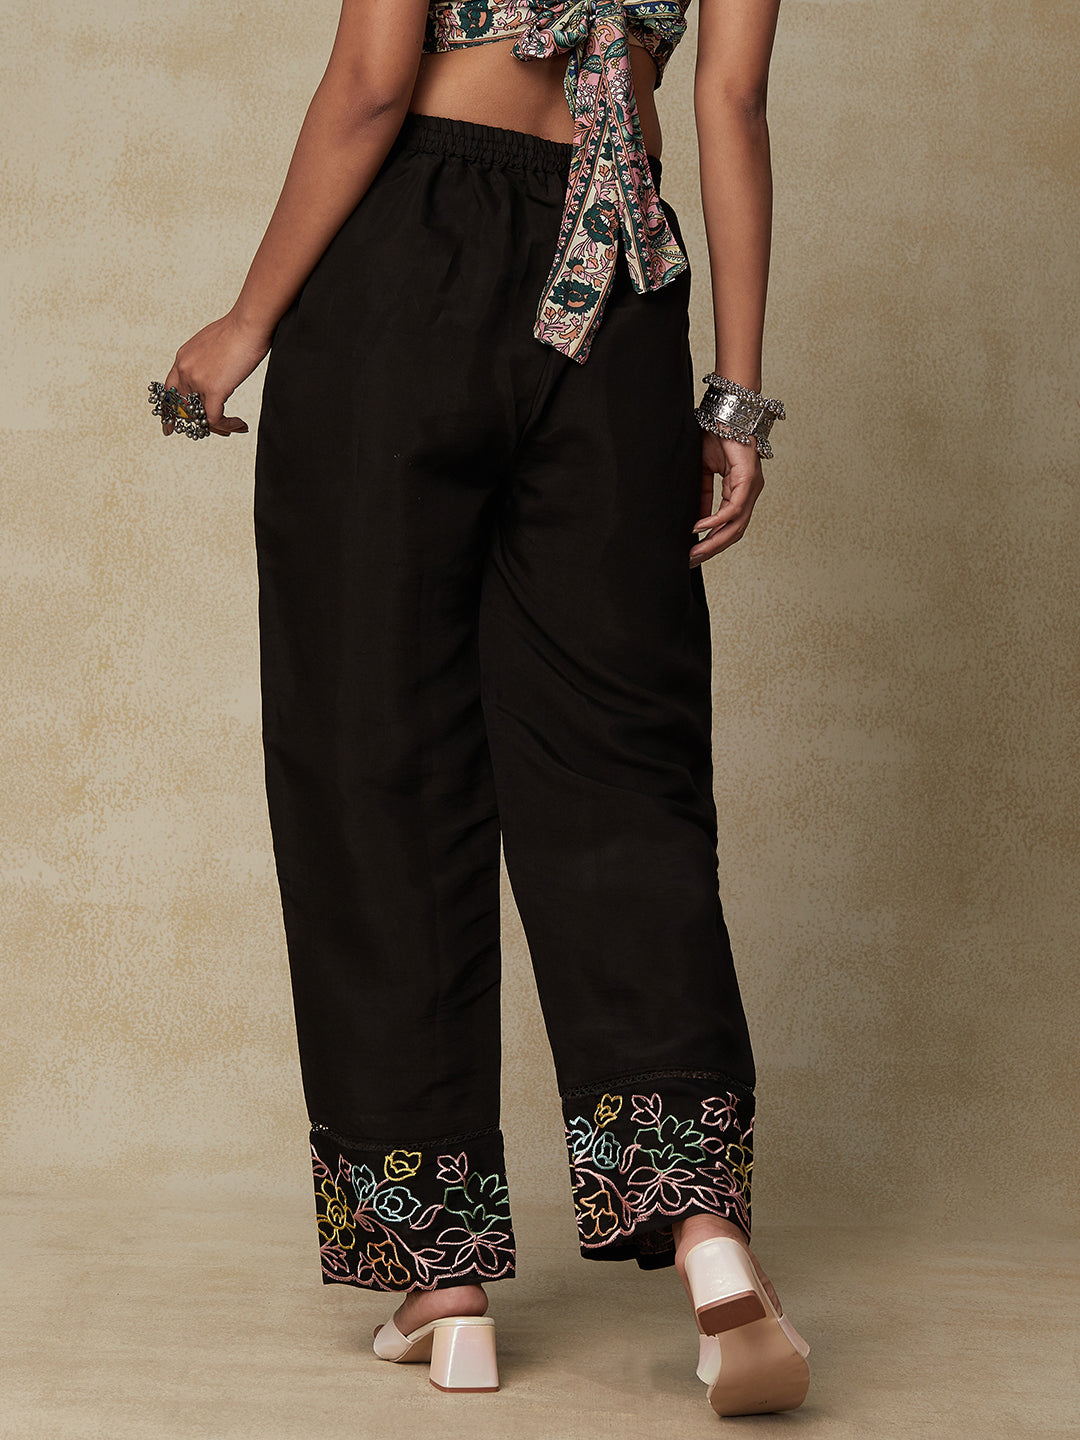 Floral Embroidered & Crochet Lace Straight Fit Pant - Black